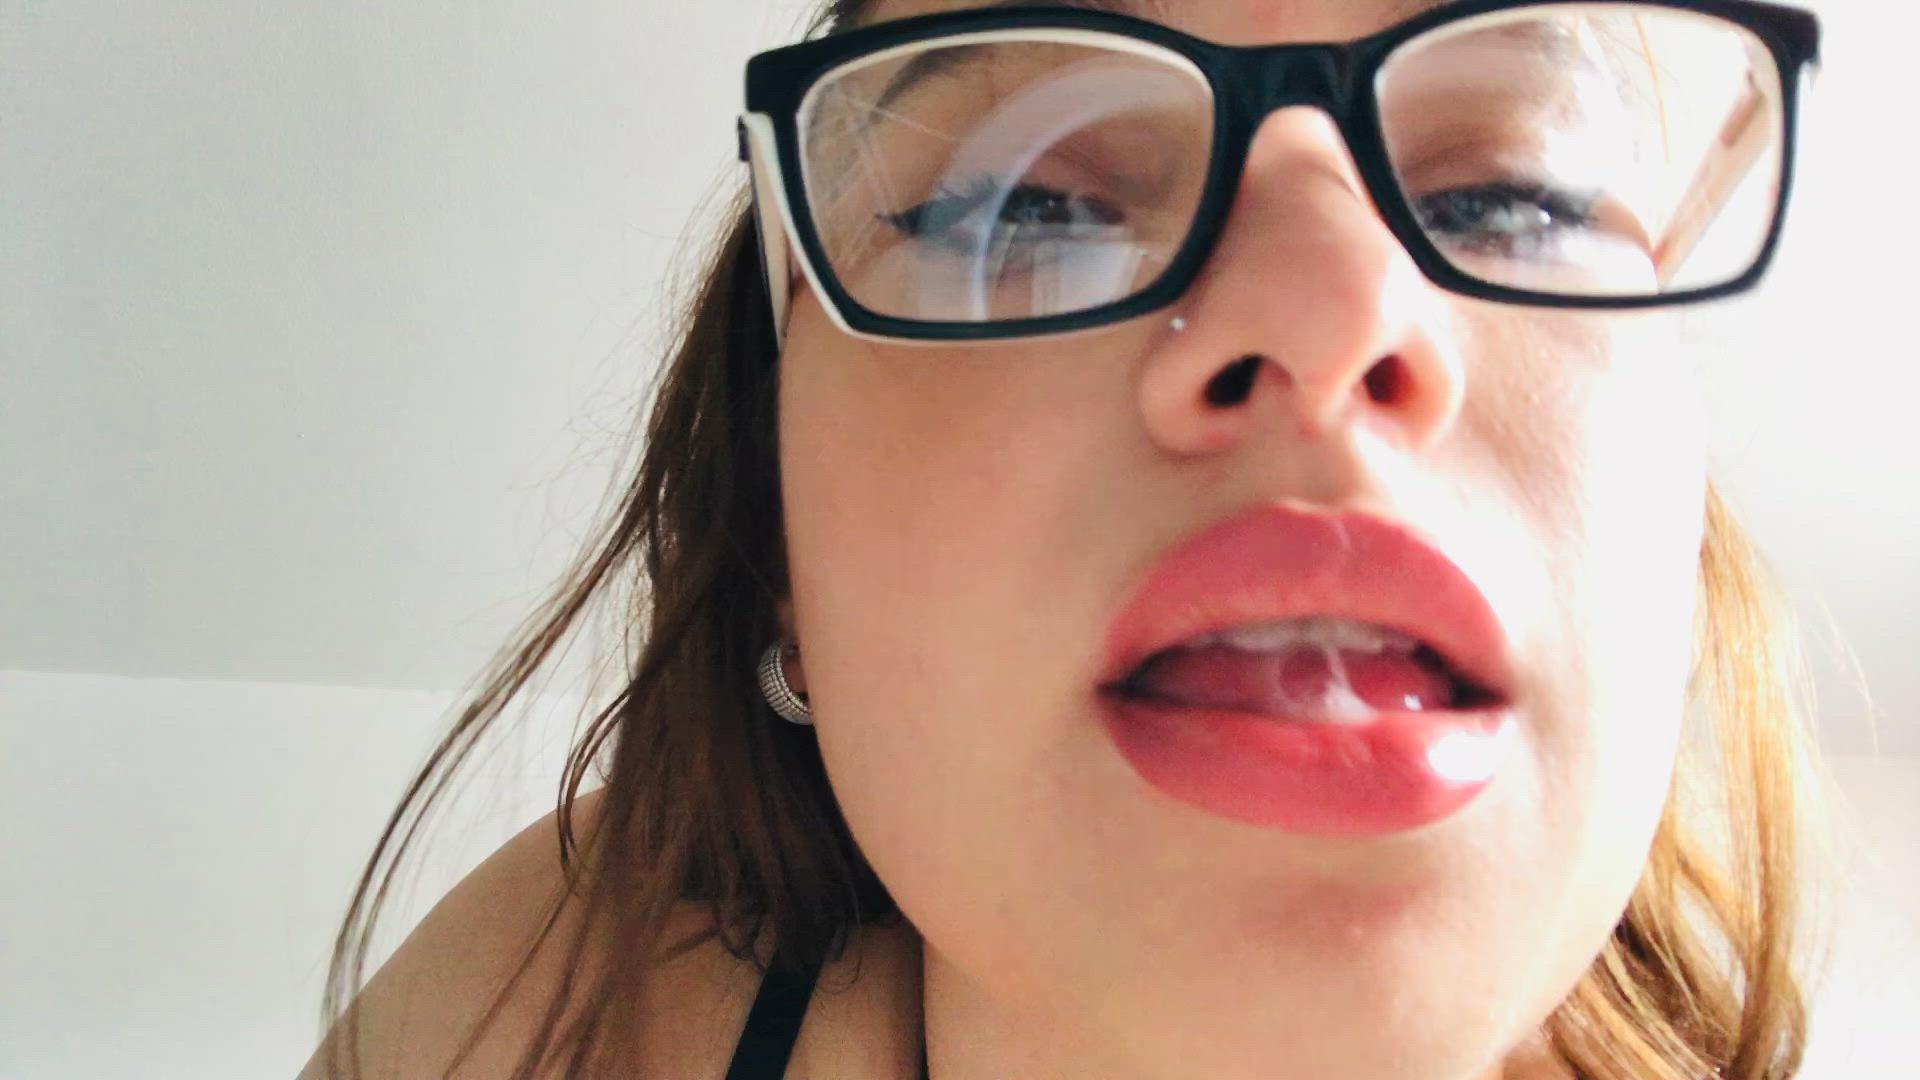 Big Tits porn video with onlyfans model caiweitman <strong>@caimille.weitman</strong>